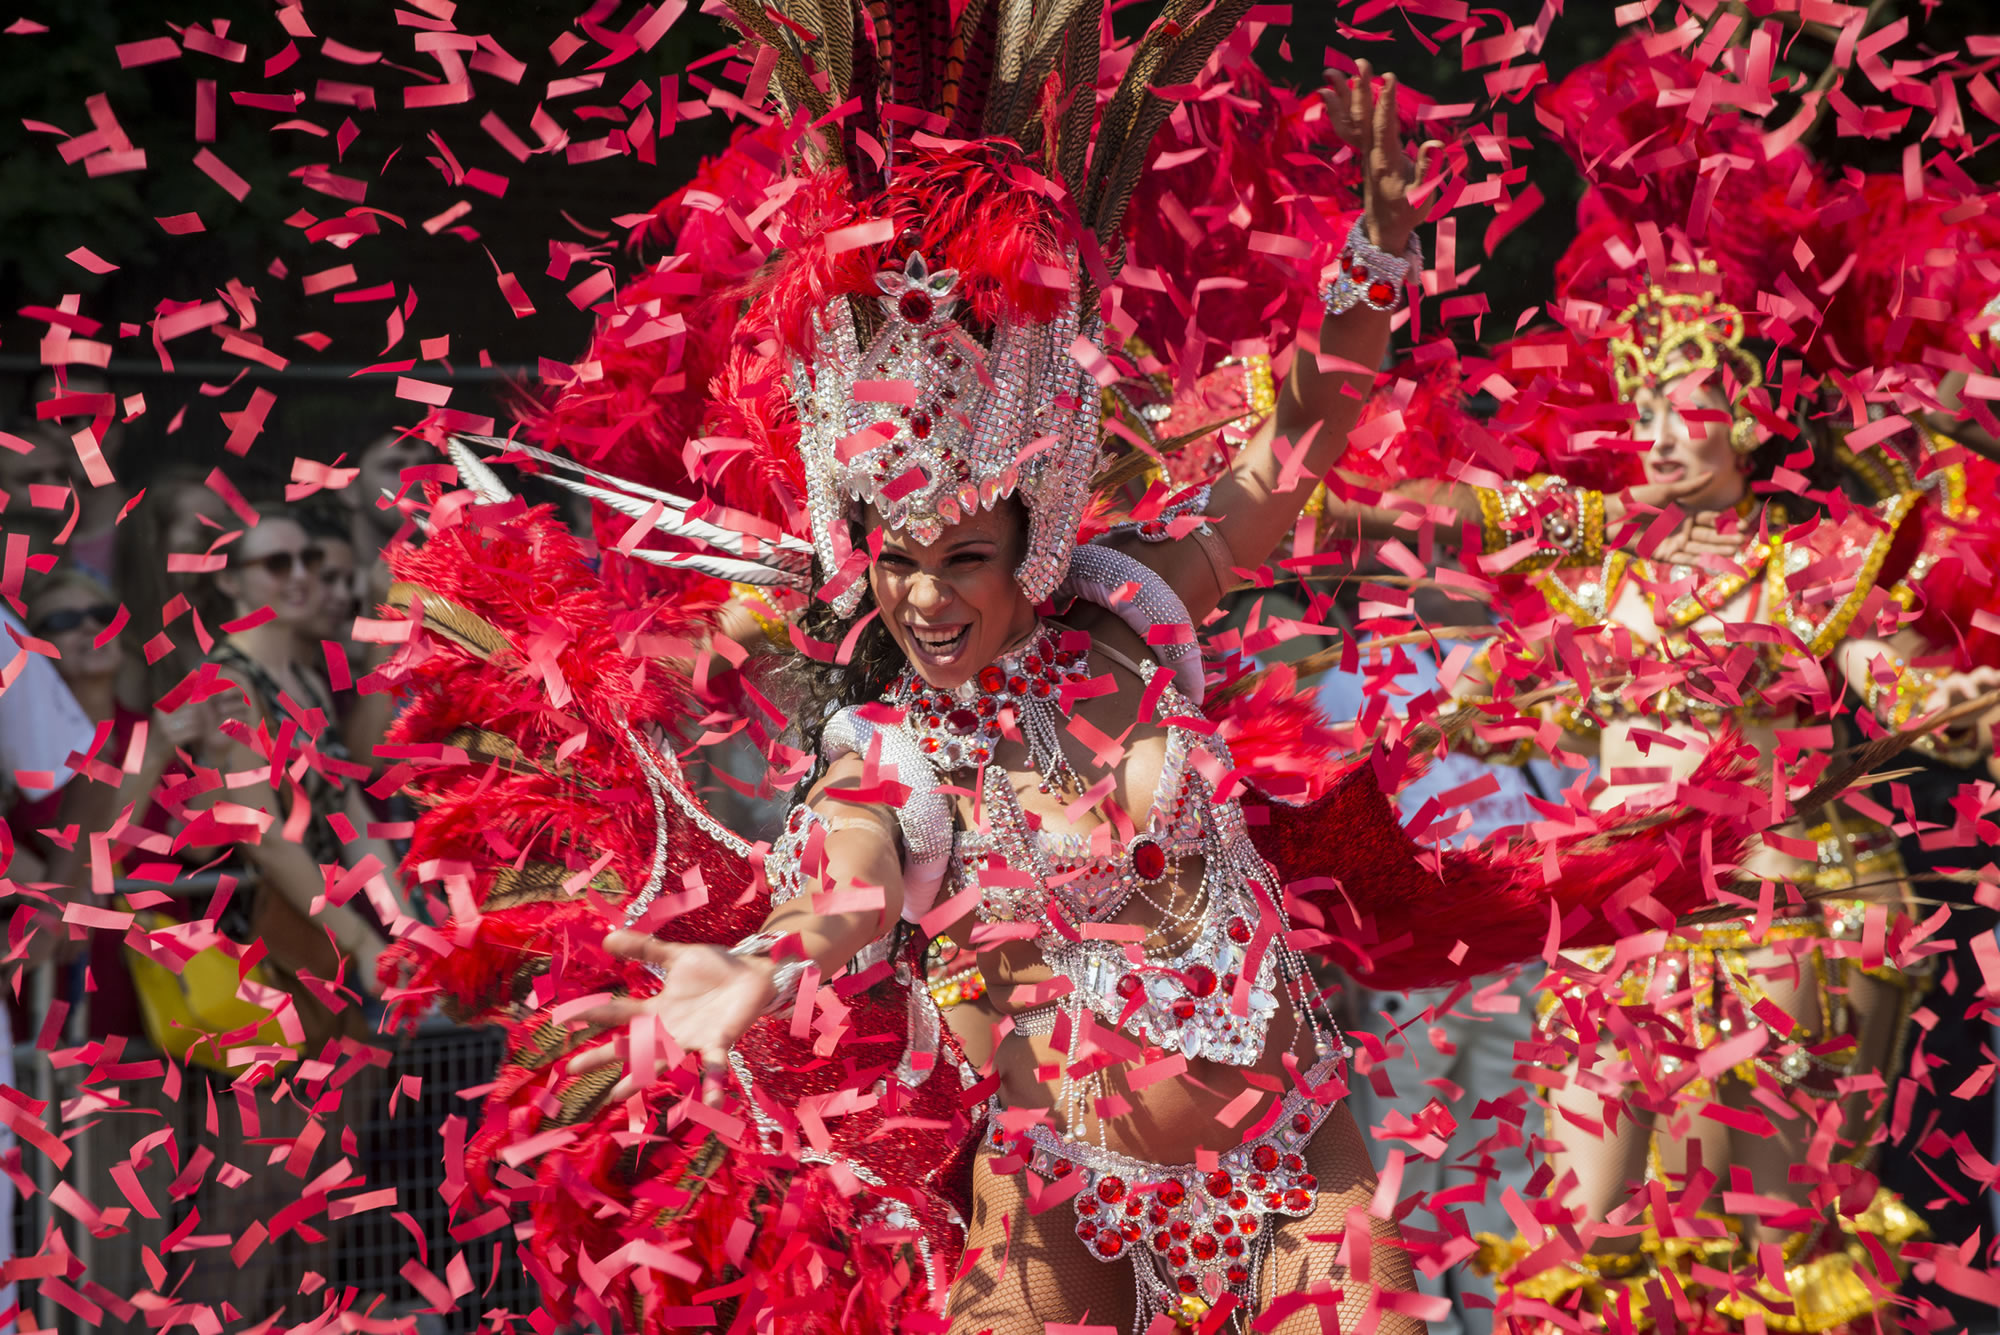 Experience the Notting Hill Carnival